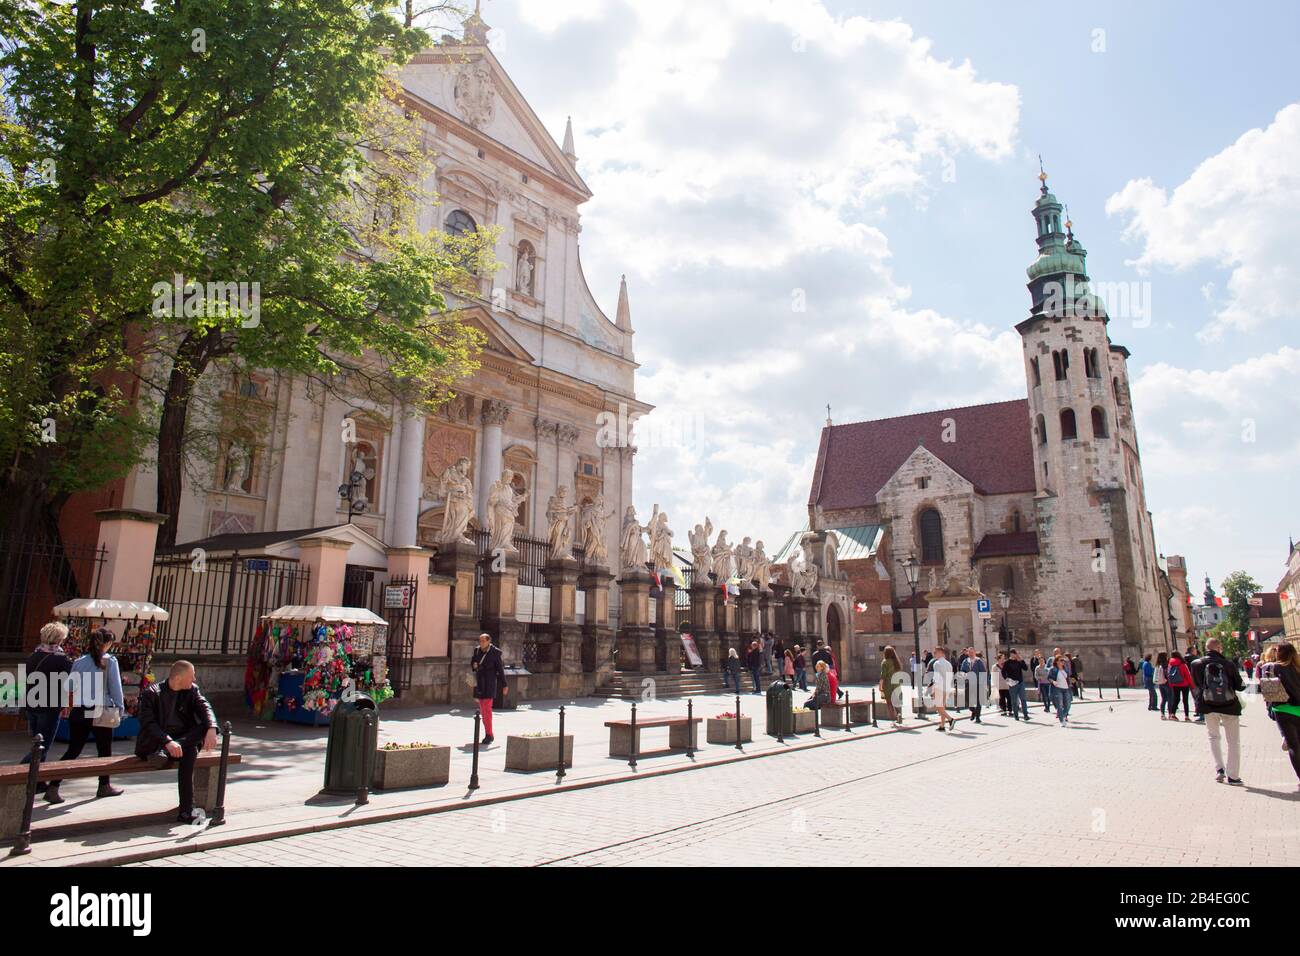 View of St. Peter and Paul Church Facade and St. Andrew's Church, Krakow Old Town, Poland Stock Photo